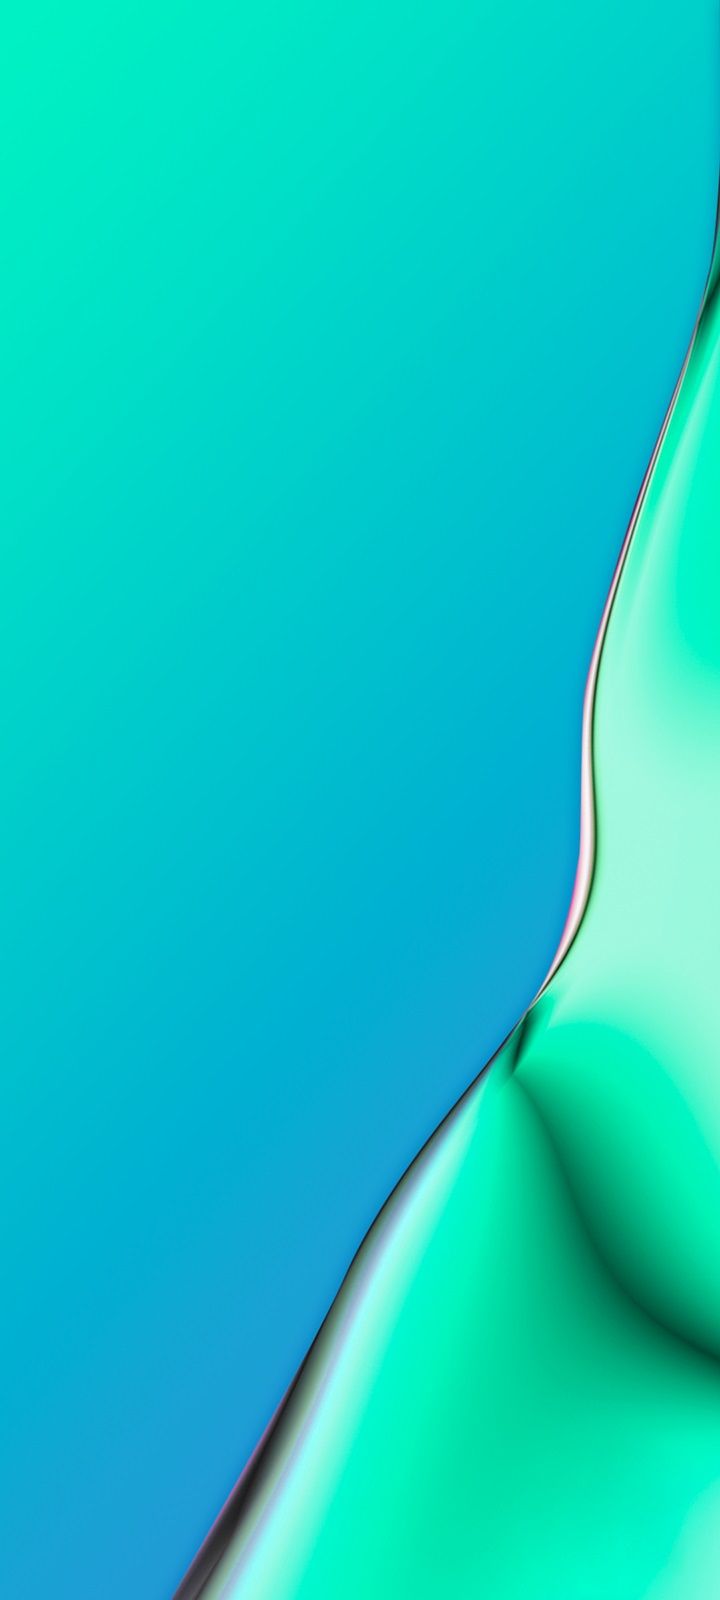 Oppo A5s Wallpaper Free Oppo A5s Background